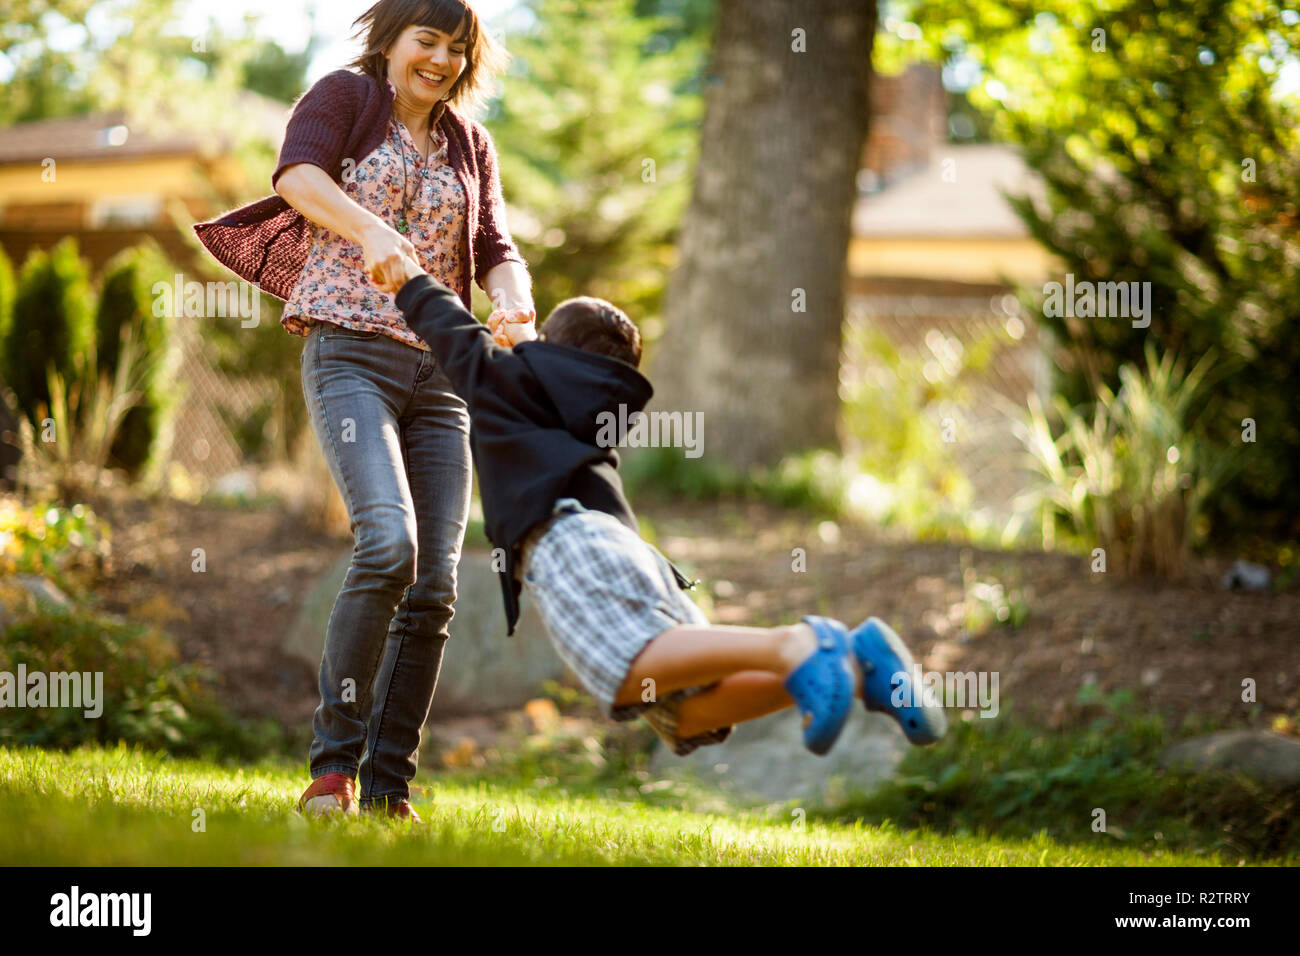 Mother playing with young son. Stock Photo